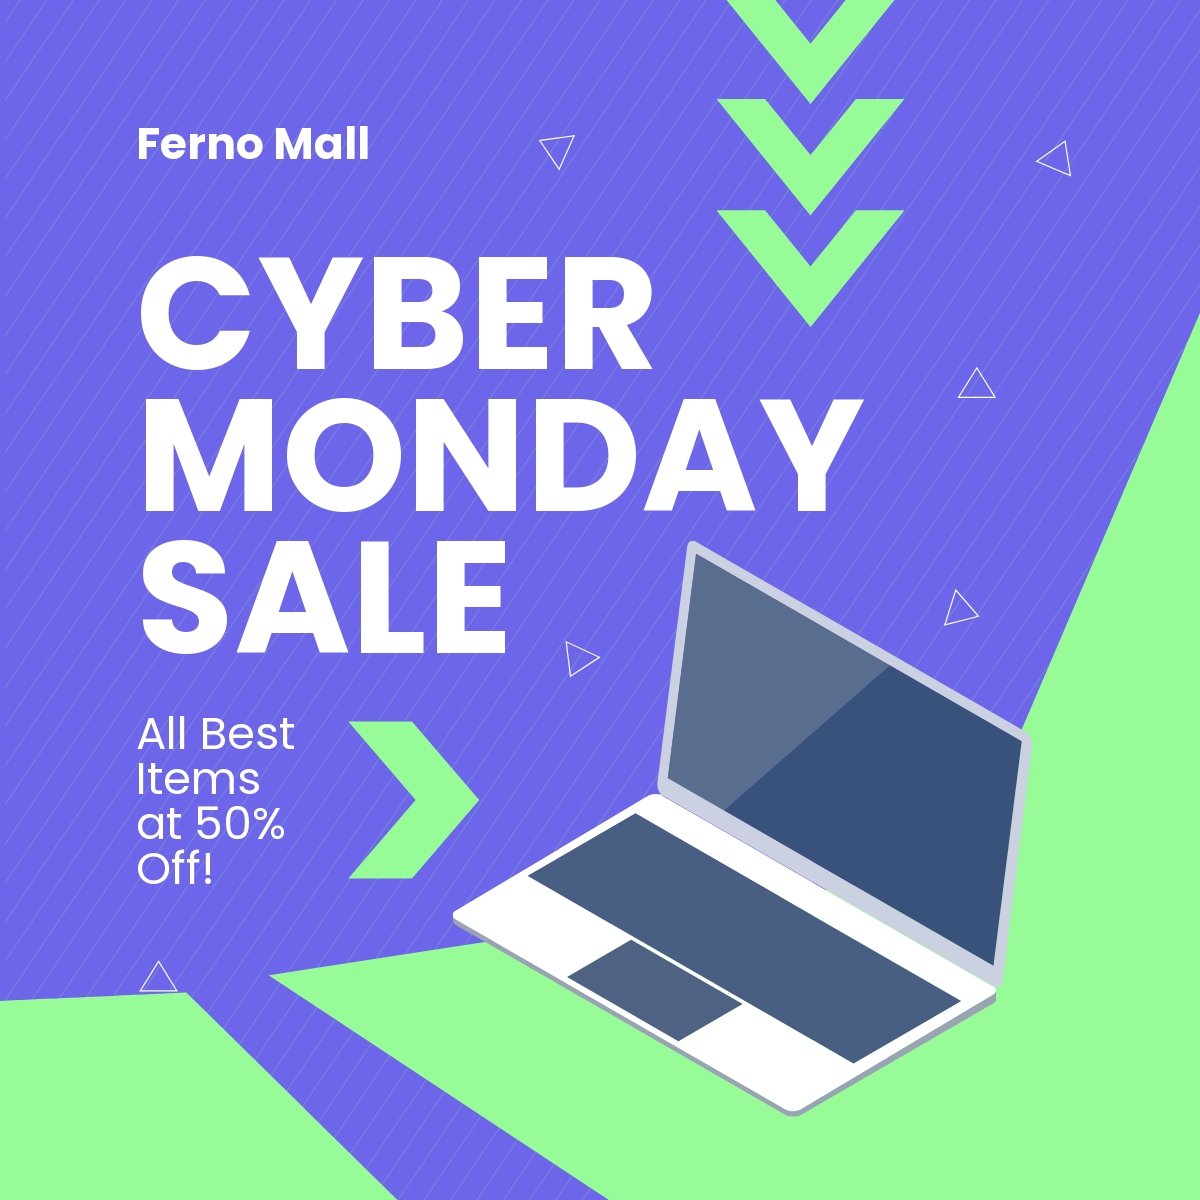 Cyber Monday Sales Event Linkedin Post Template